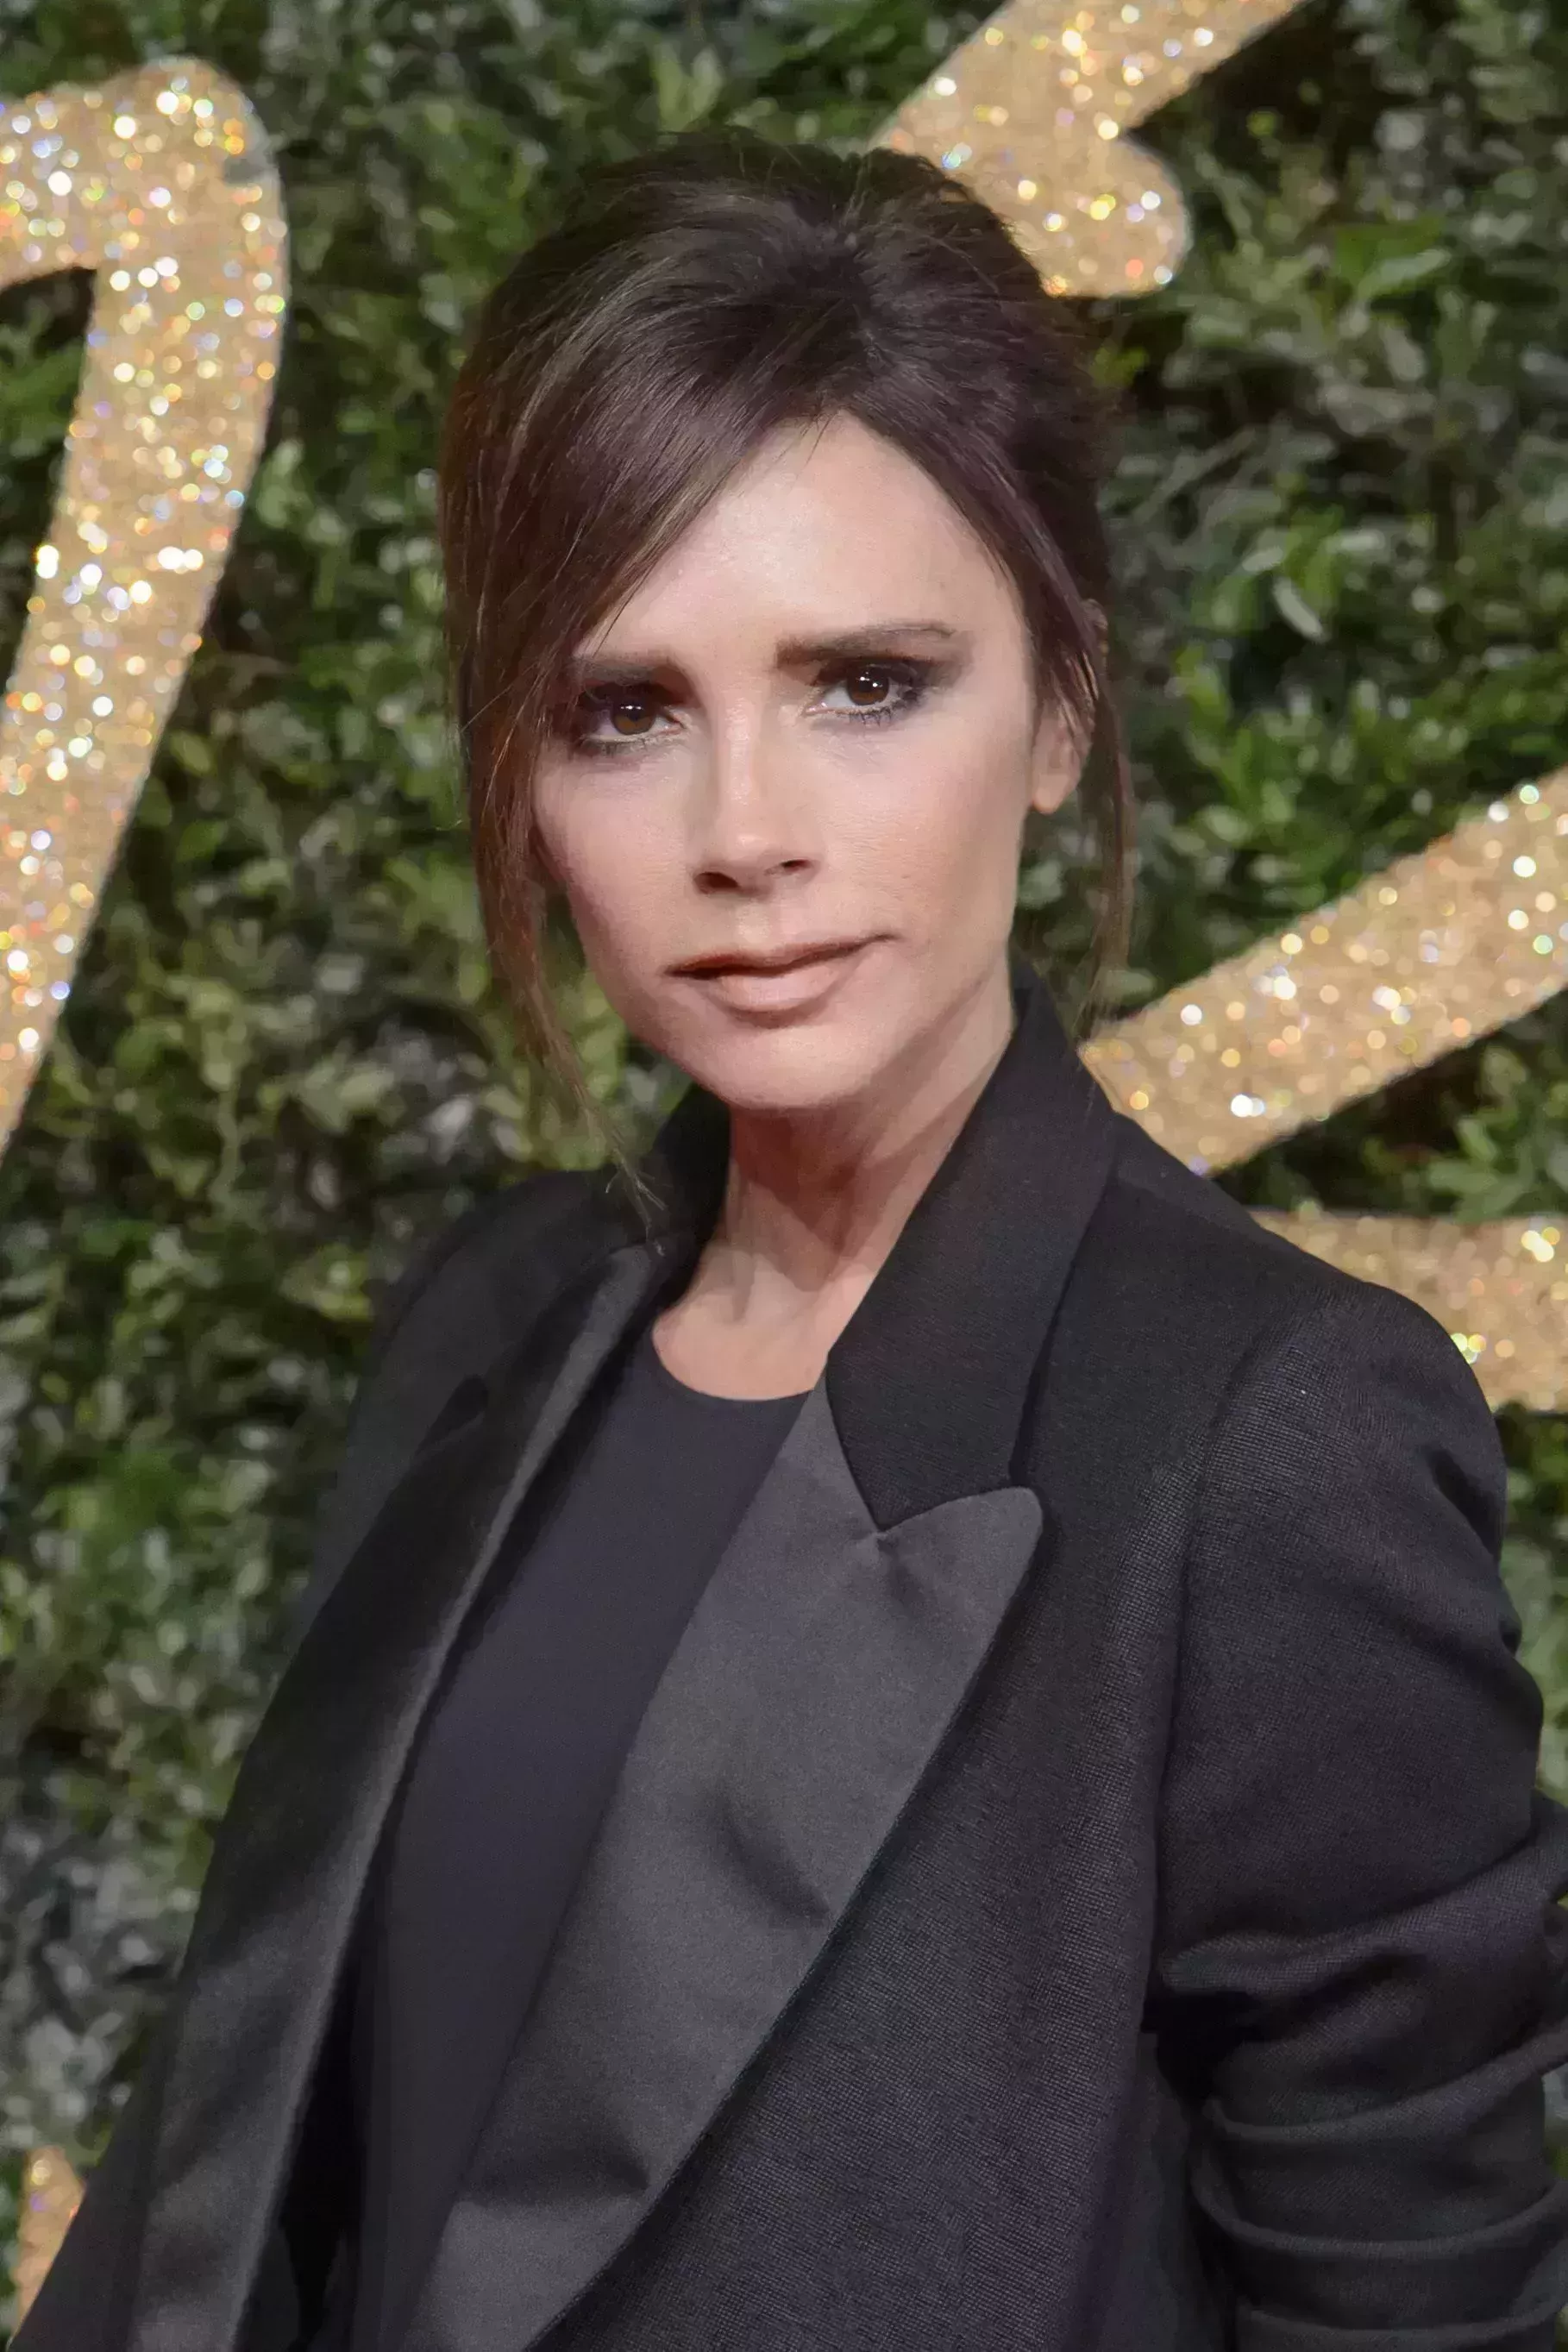 Victoria Beckham’s Retro Updo With Side Bangs